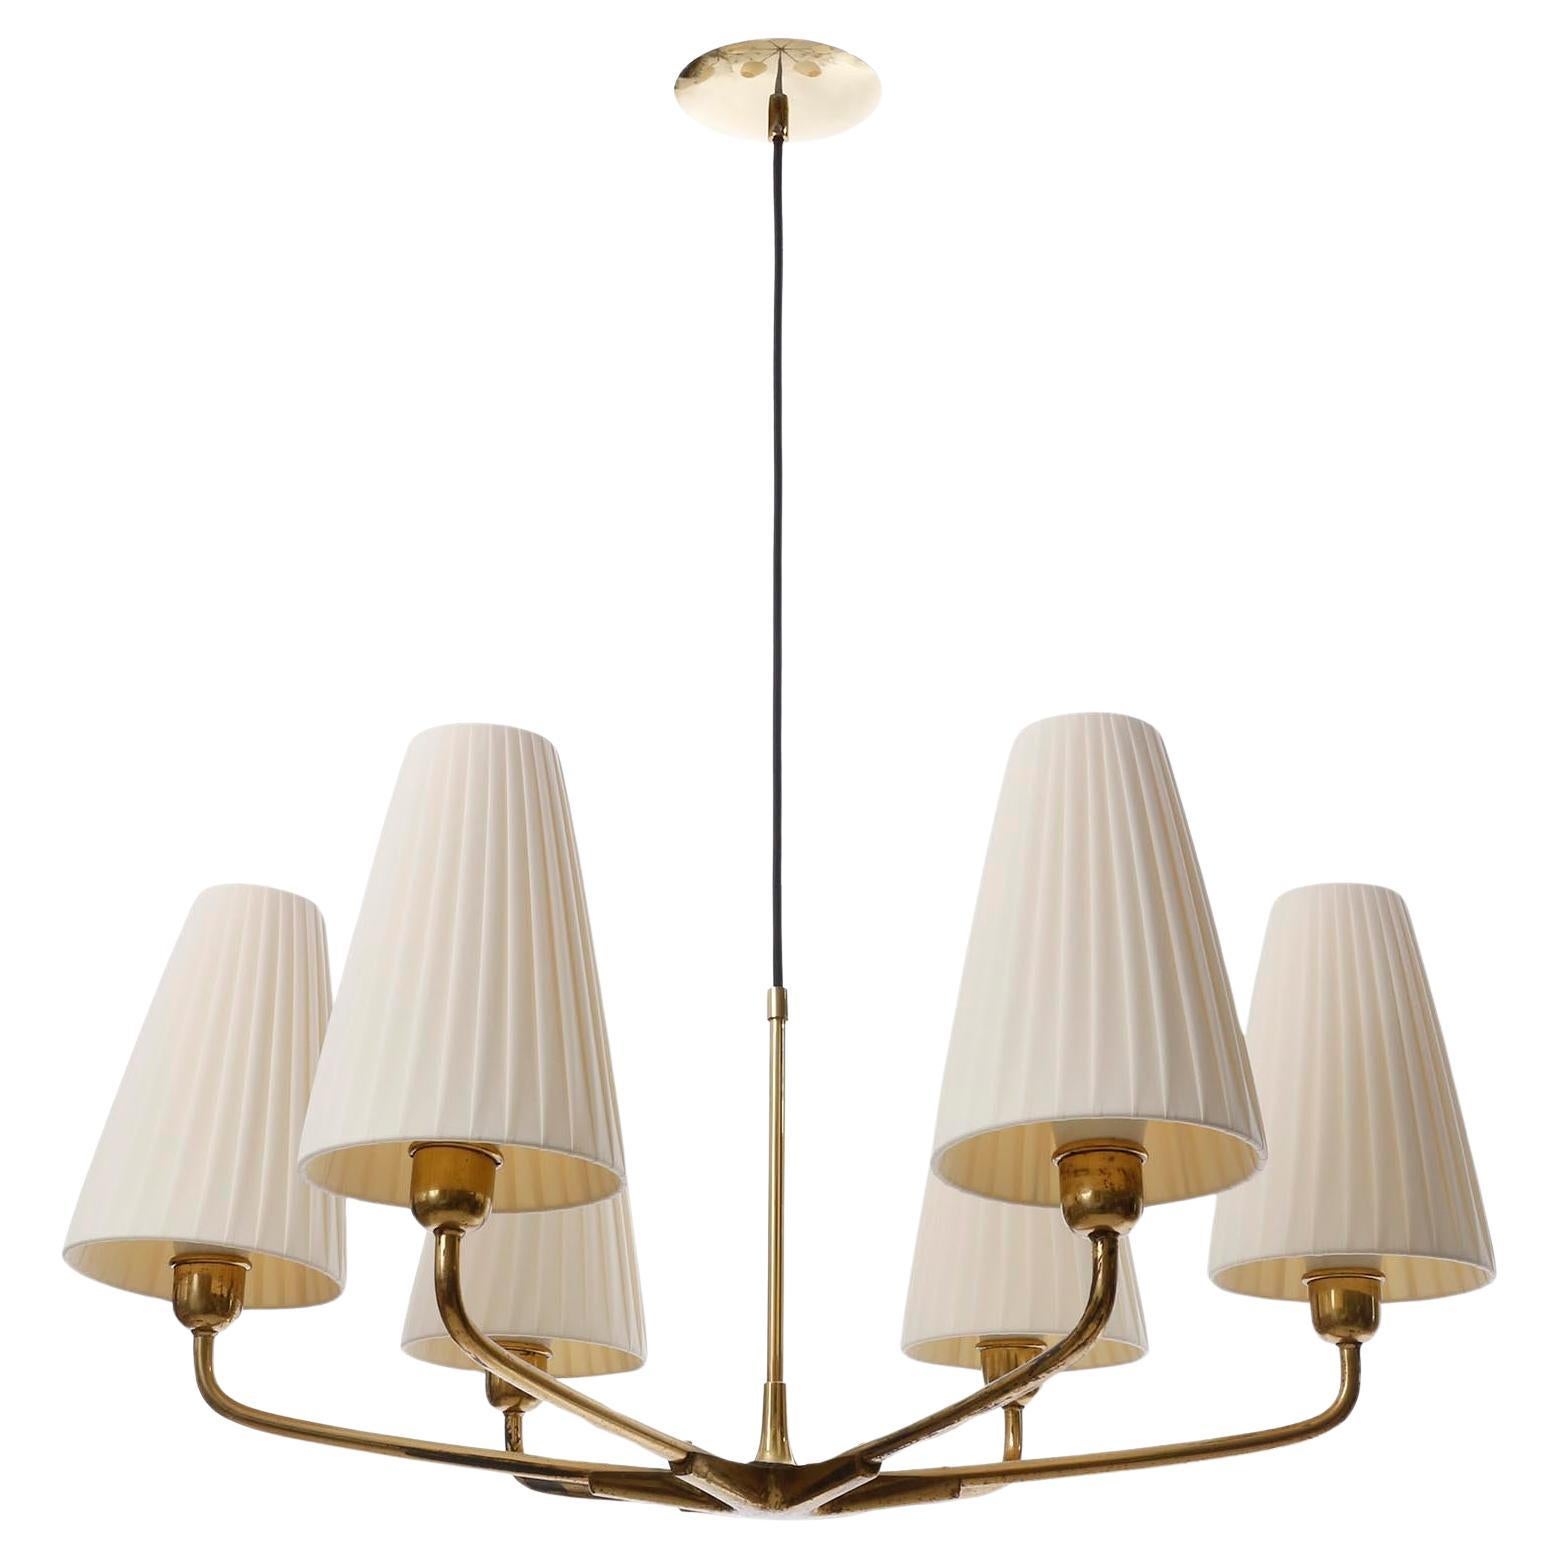 A fantastic pendant light manufactured in Austria in 1930s.
The fixture is made of brass with six curved arms with cream-colored pleated fabric shades.
The brass parts have patina, minor wear and a warm aged hue. The lamp shades are renewed. 
The